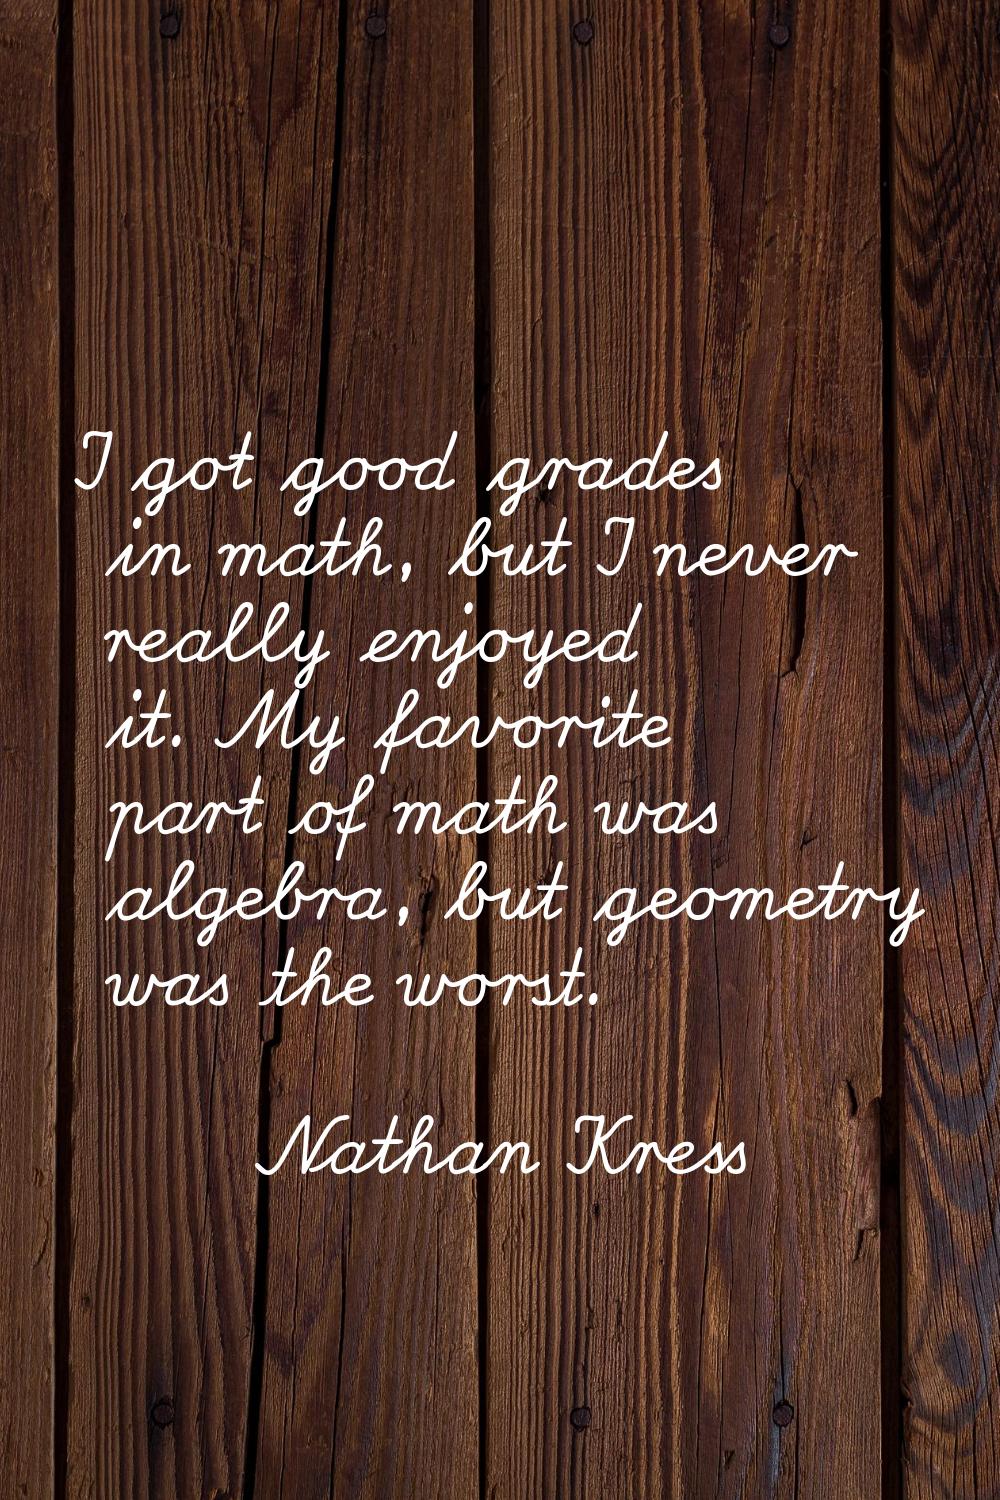 I got good grades in math, but I never really enjoyed it. My favorite part of math was algebra, but